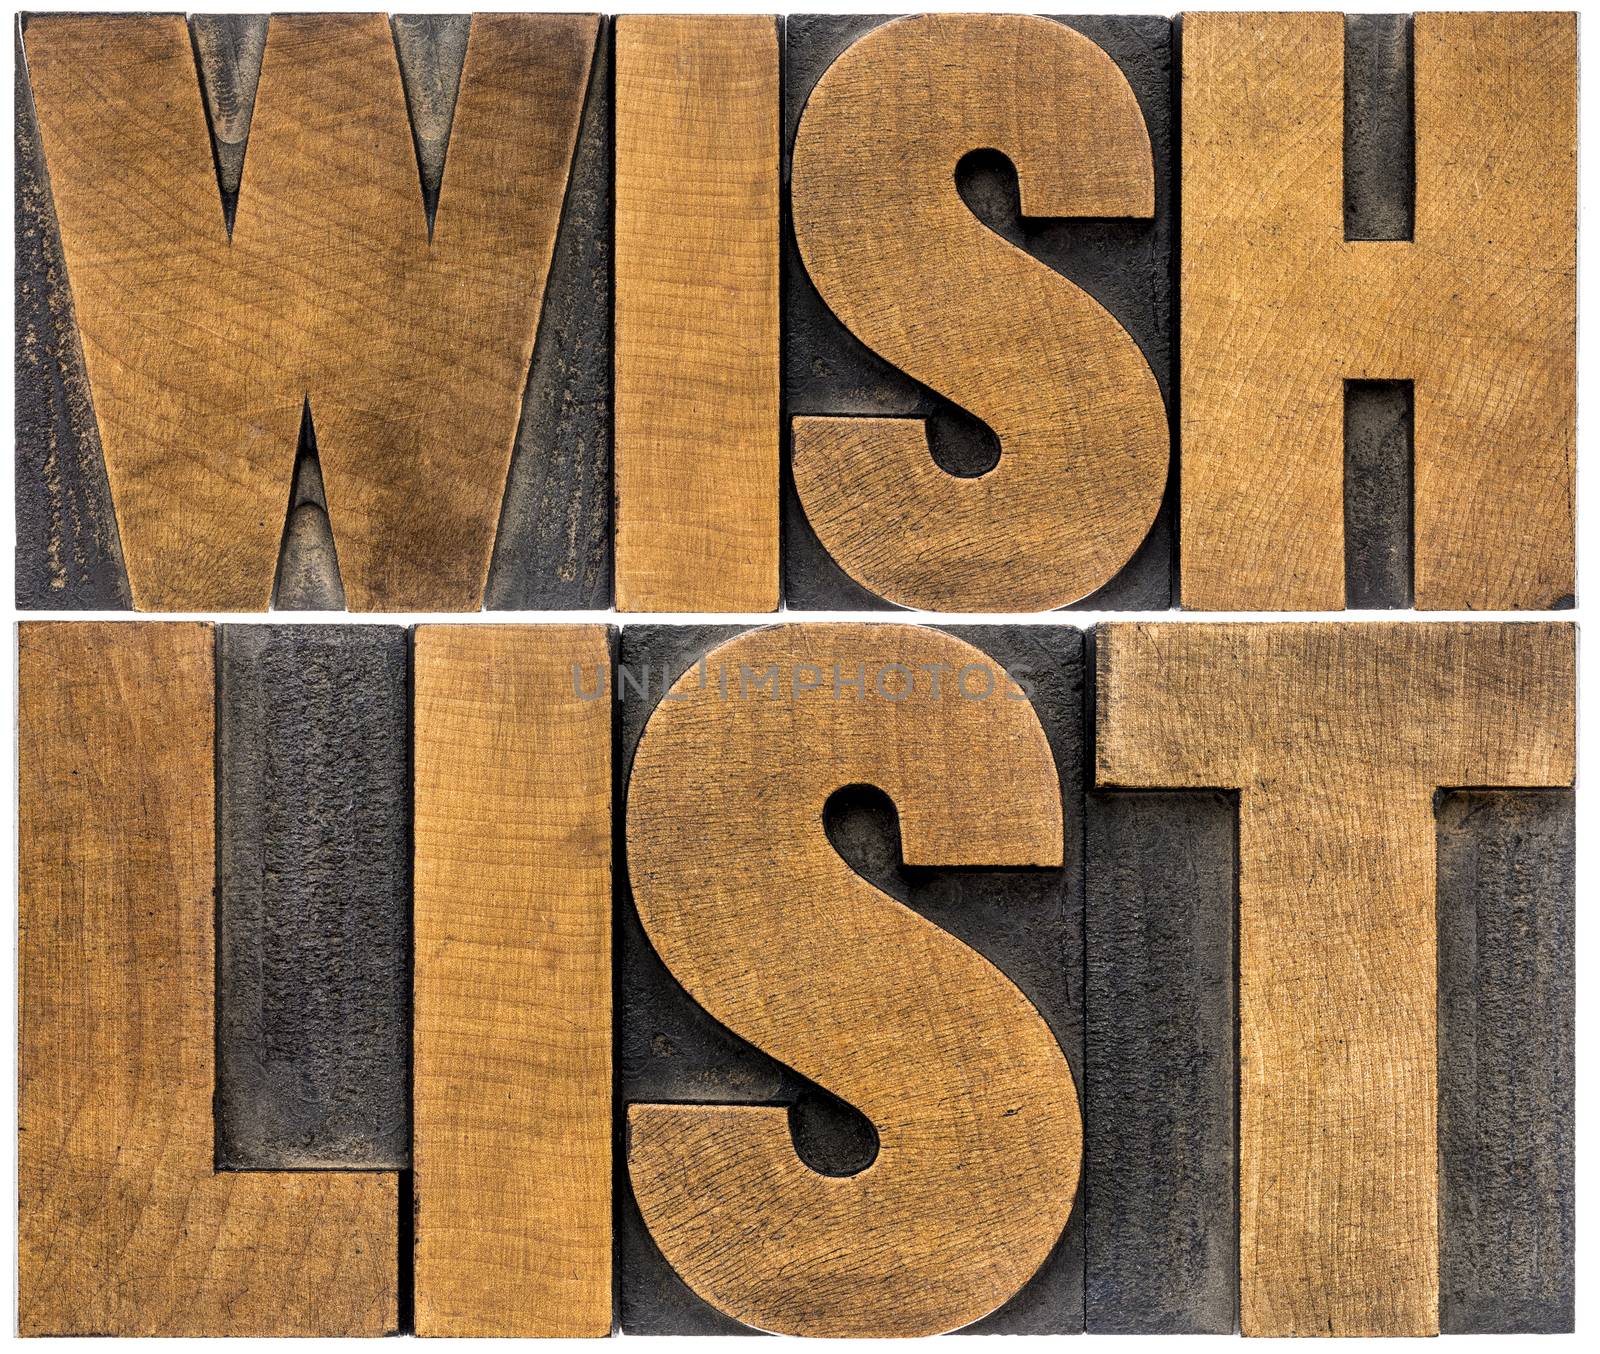 wish list word abstract typography by PixelsAway